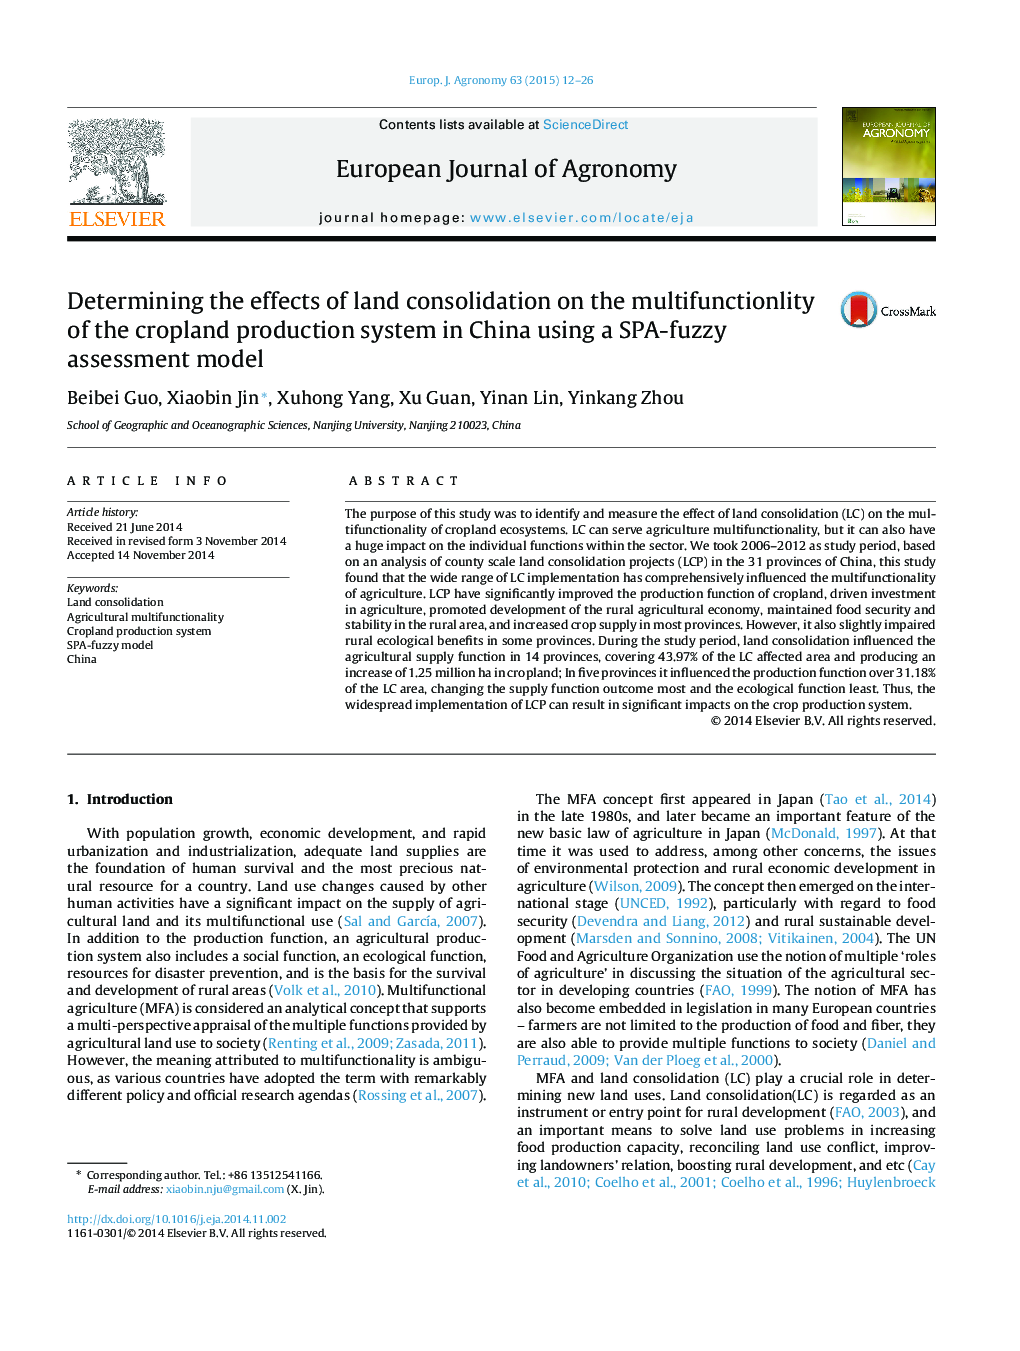 Determining the effects of land consolidation on the multifunctionlity of the cropland production system in China using a SPA-fuzzy assessment model